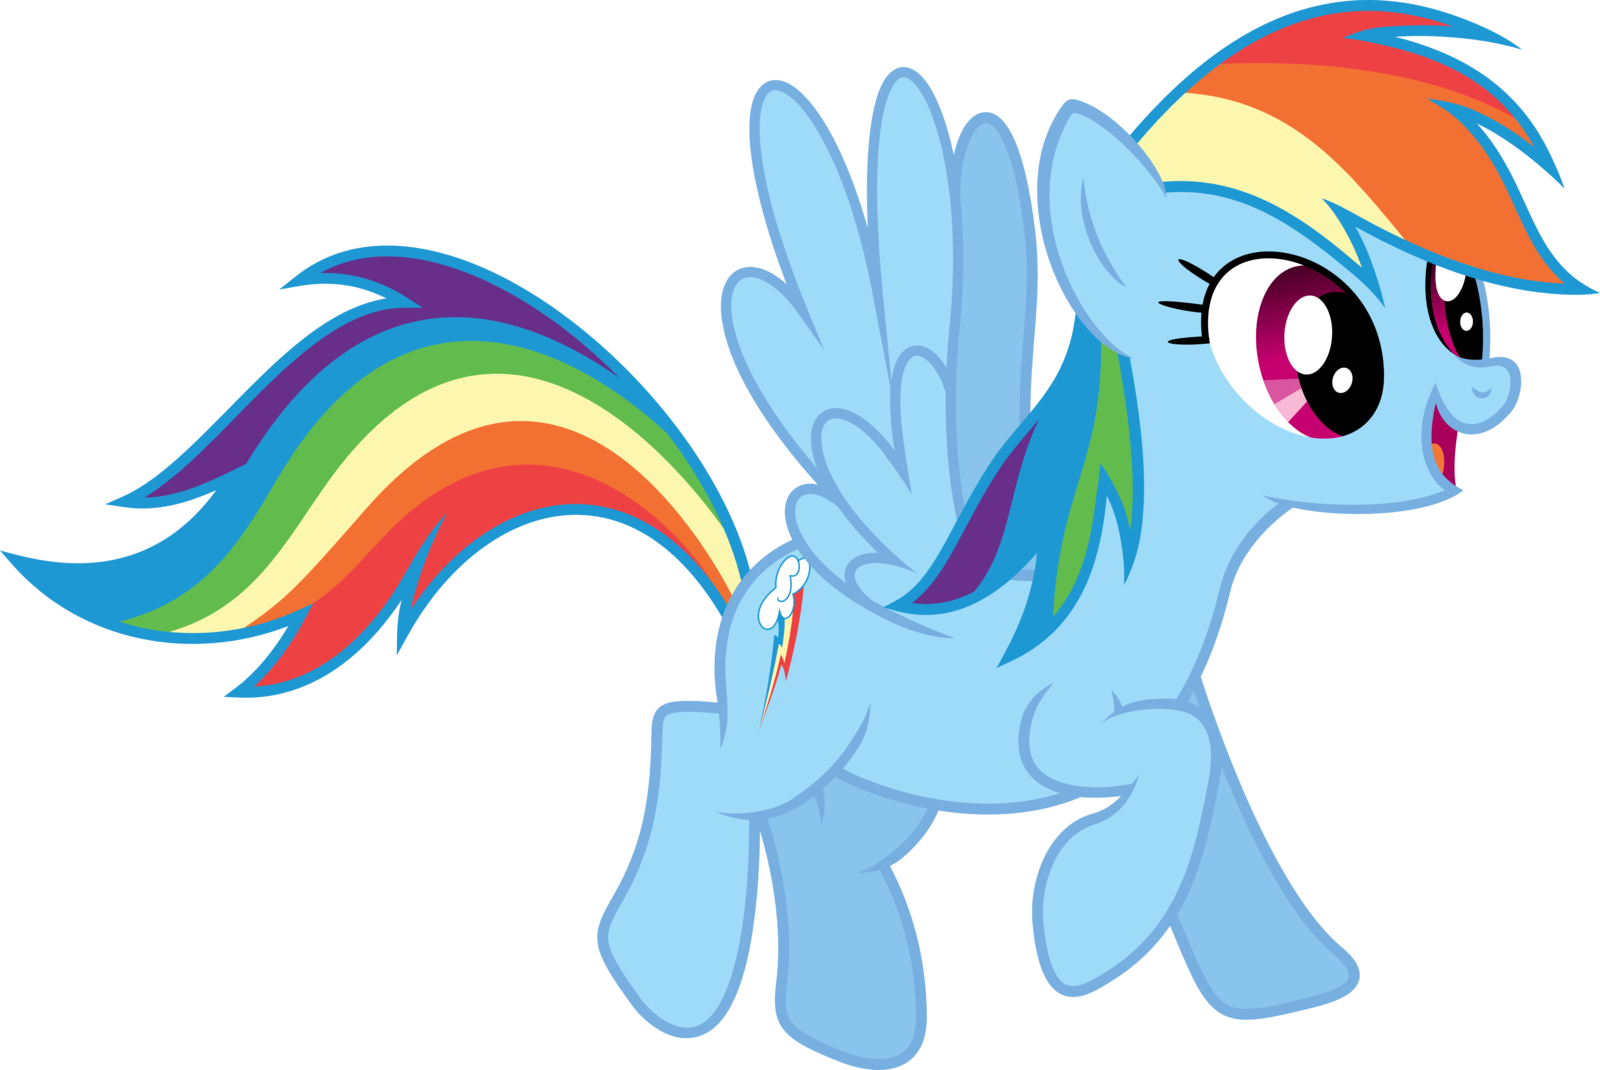 FANMADE Rainbow dash by timei